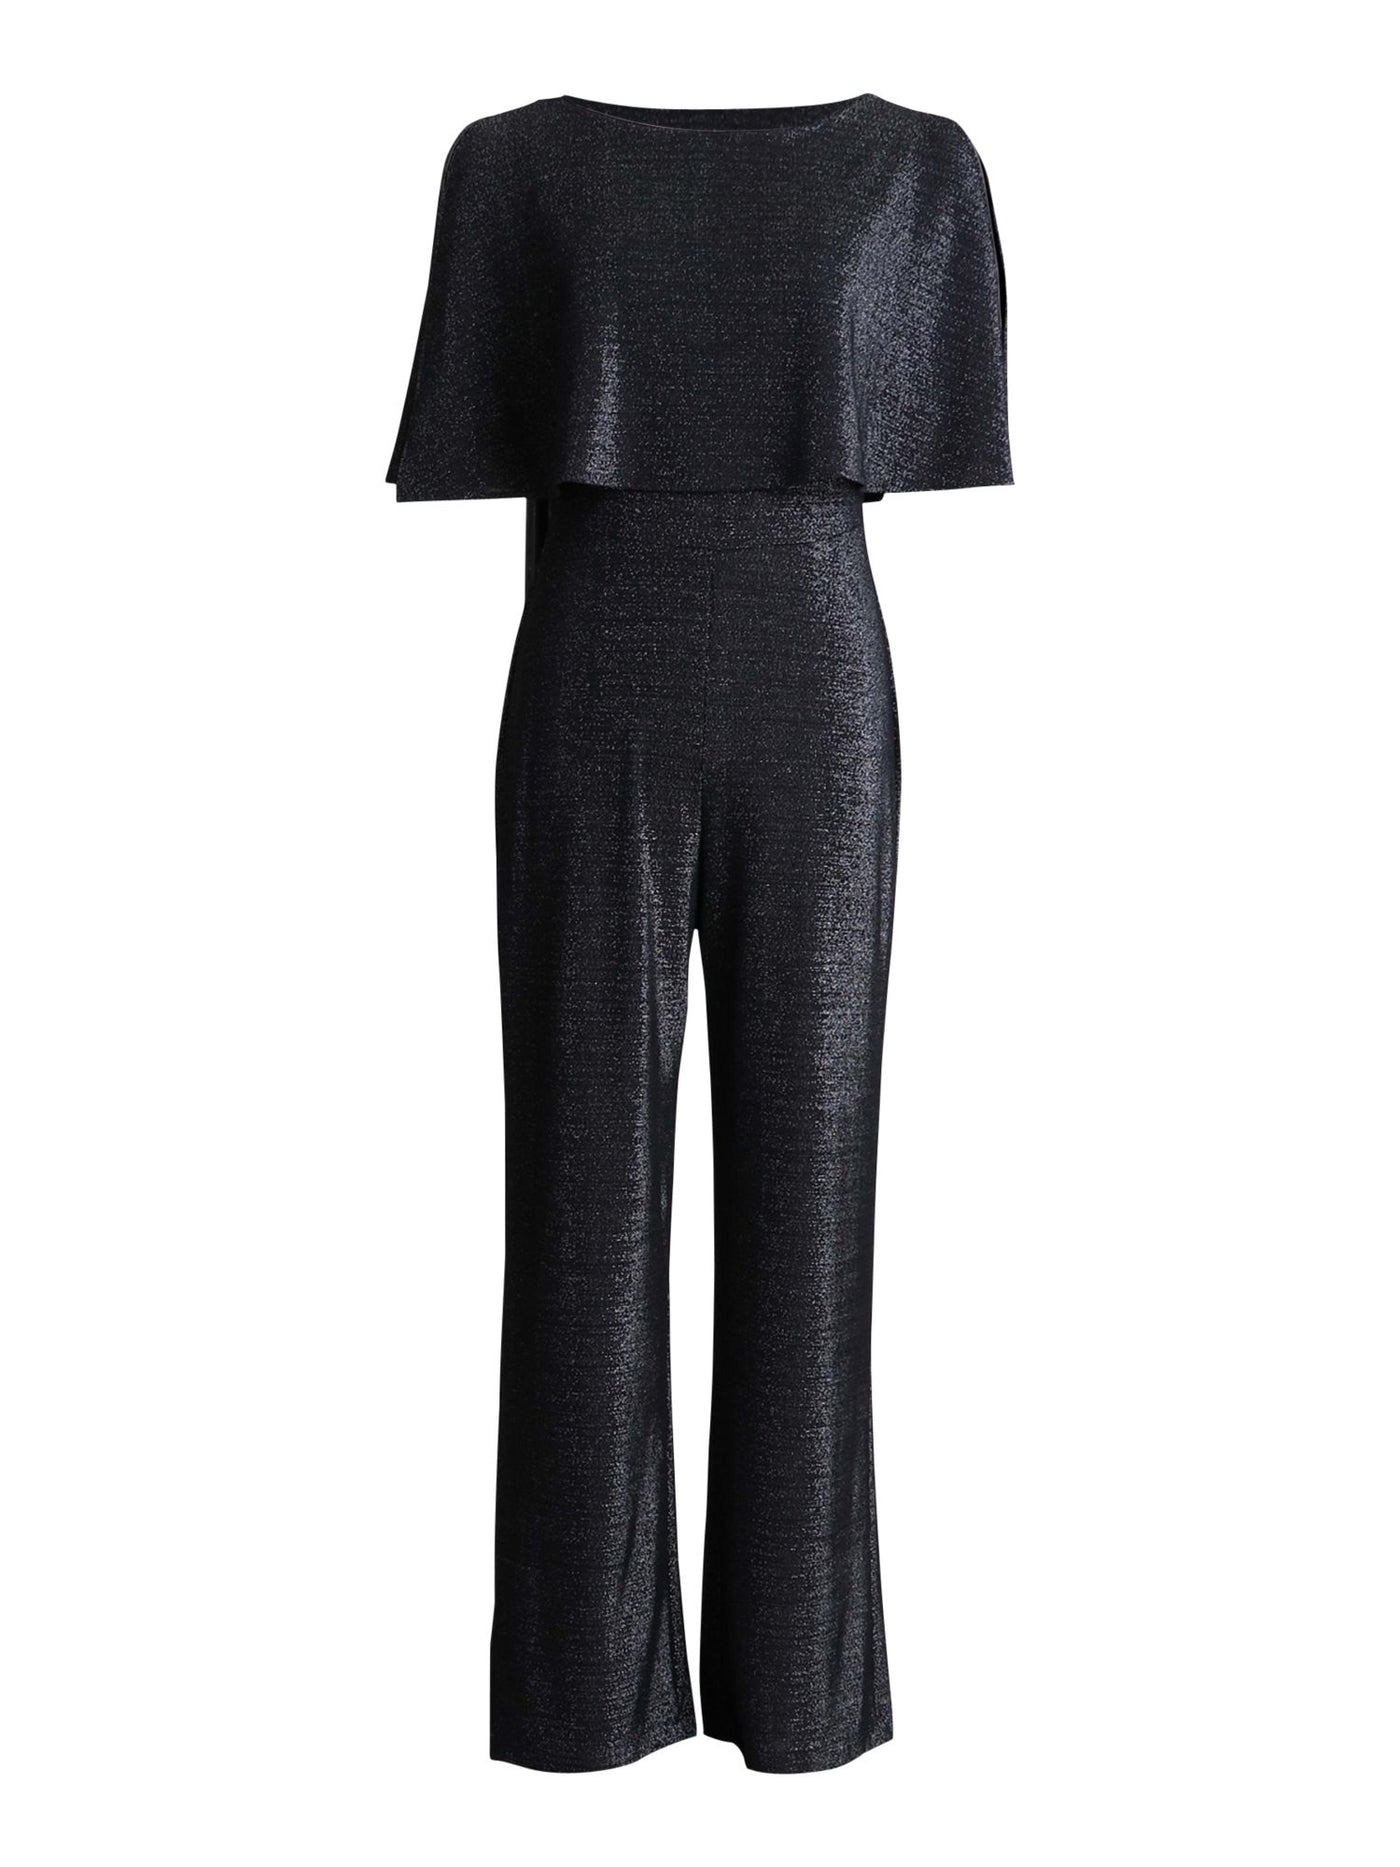 CONNECTED APPAREL Womens Boat Neck Evening Straight leg Jumpsuit